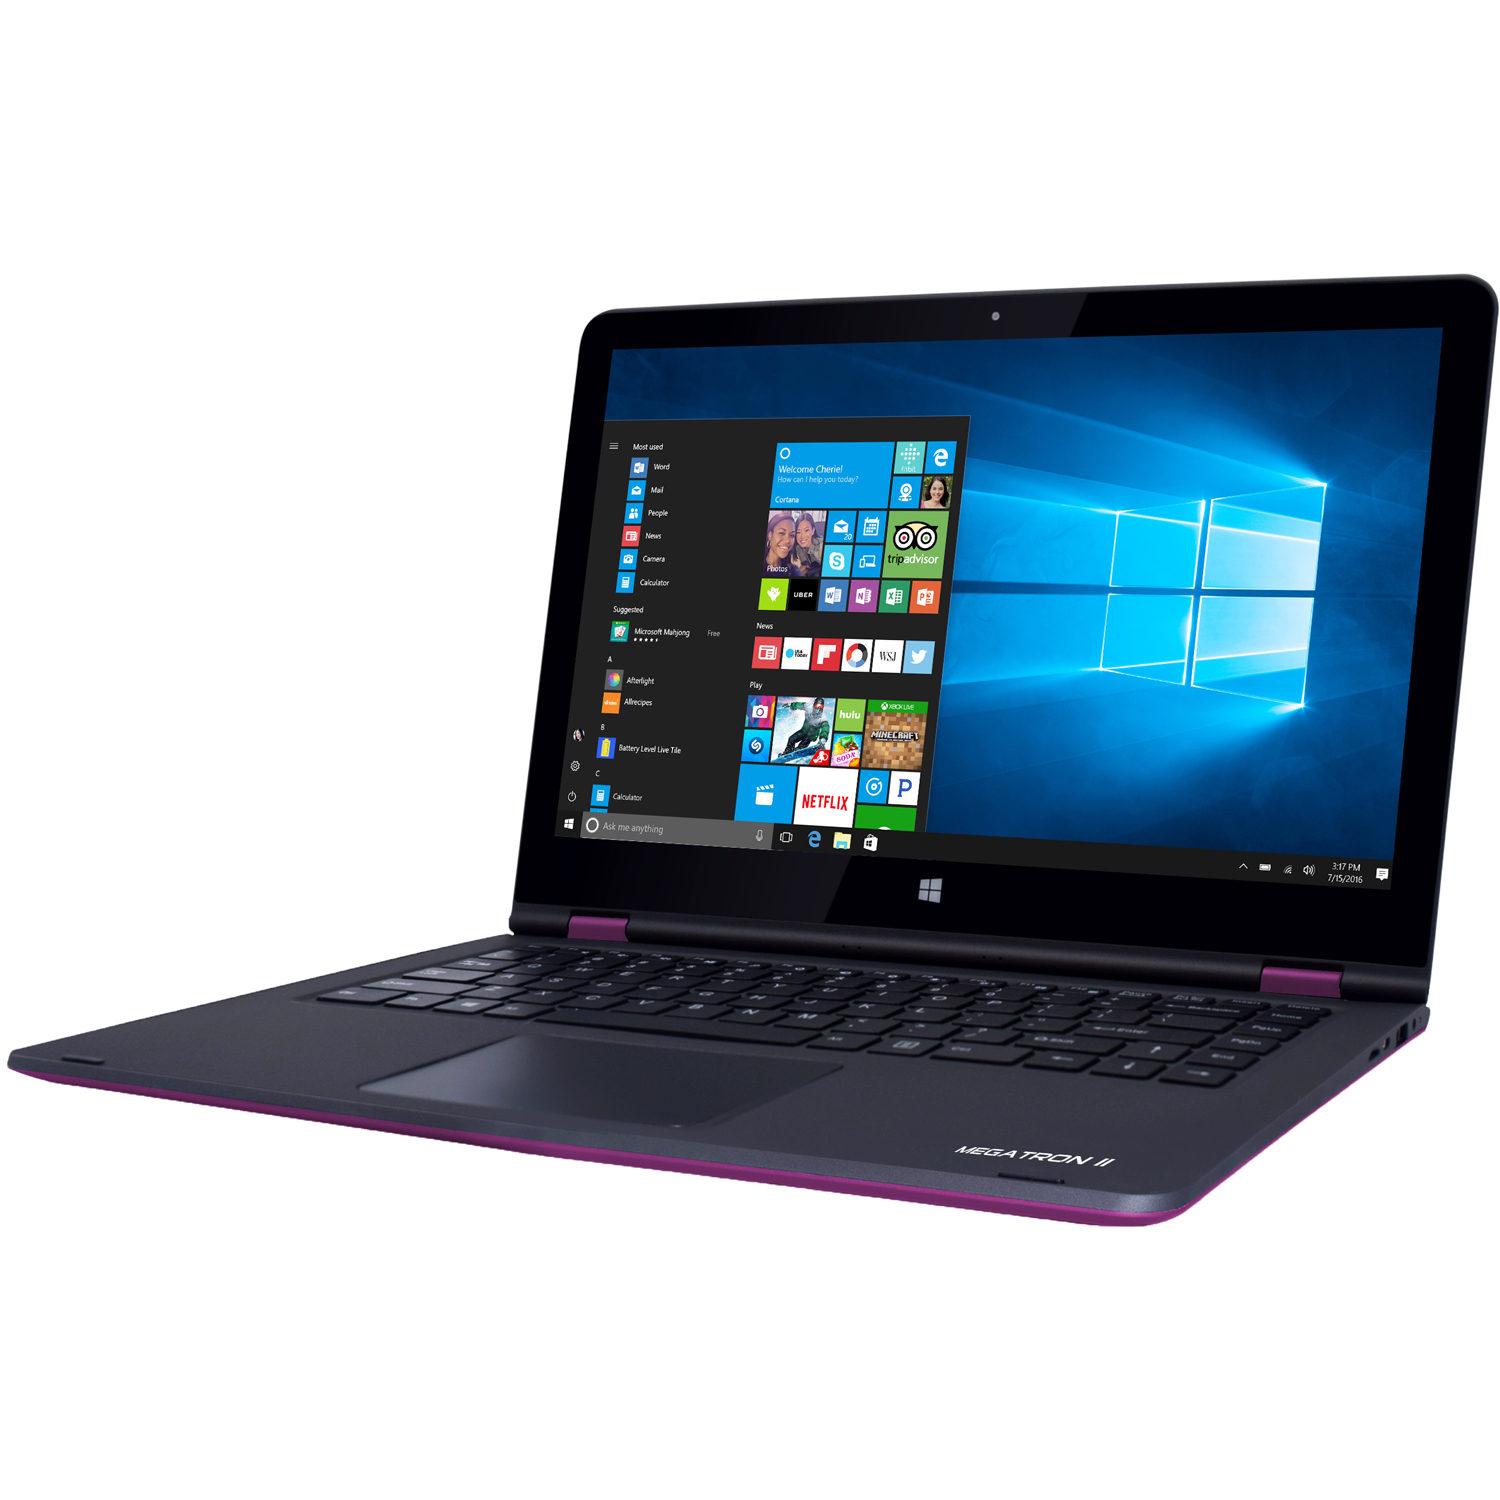 iView MEGATRON II - 14.1" Convertible Touchscreen Laptop (2 in 1) with Windows 10, Intel Atom Processor, 2GB memory, 32GB storage, 2MP Front Camera and 5MP Rear Camera, 10 hour battery - Pink - image 2 of 3